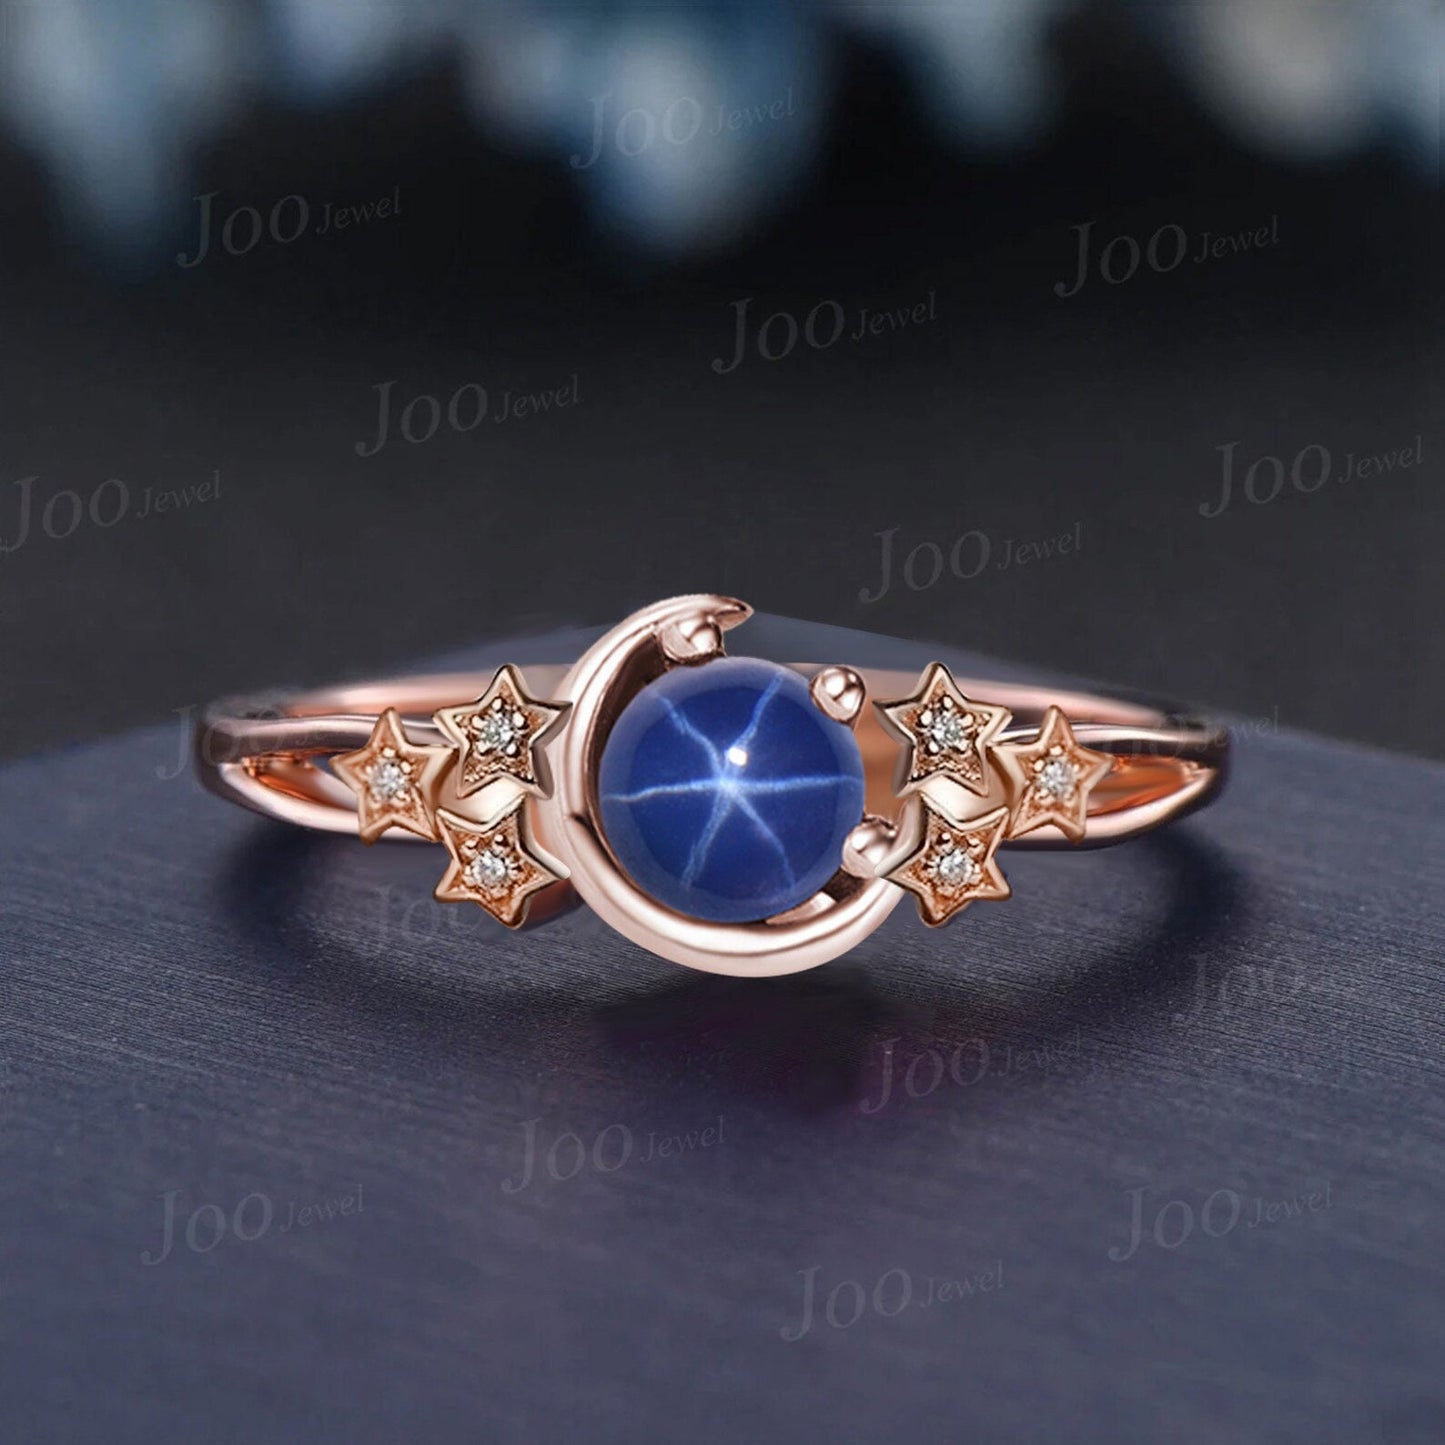 5mm Round Star Sapphire Moon Star Engagement Ring Cluster Wedding Ring Split Shank Band Unique Personalized Anniversary/Promise Ring for Her